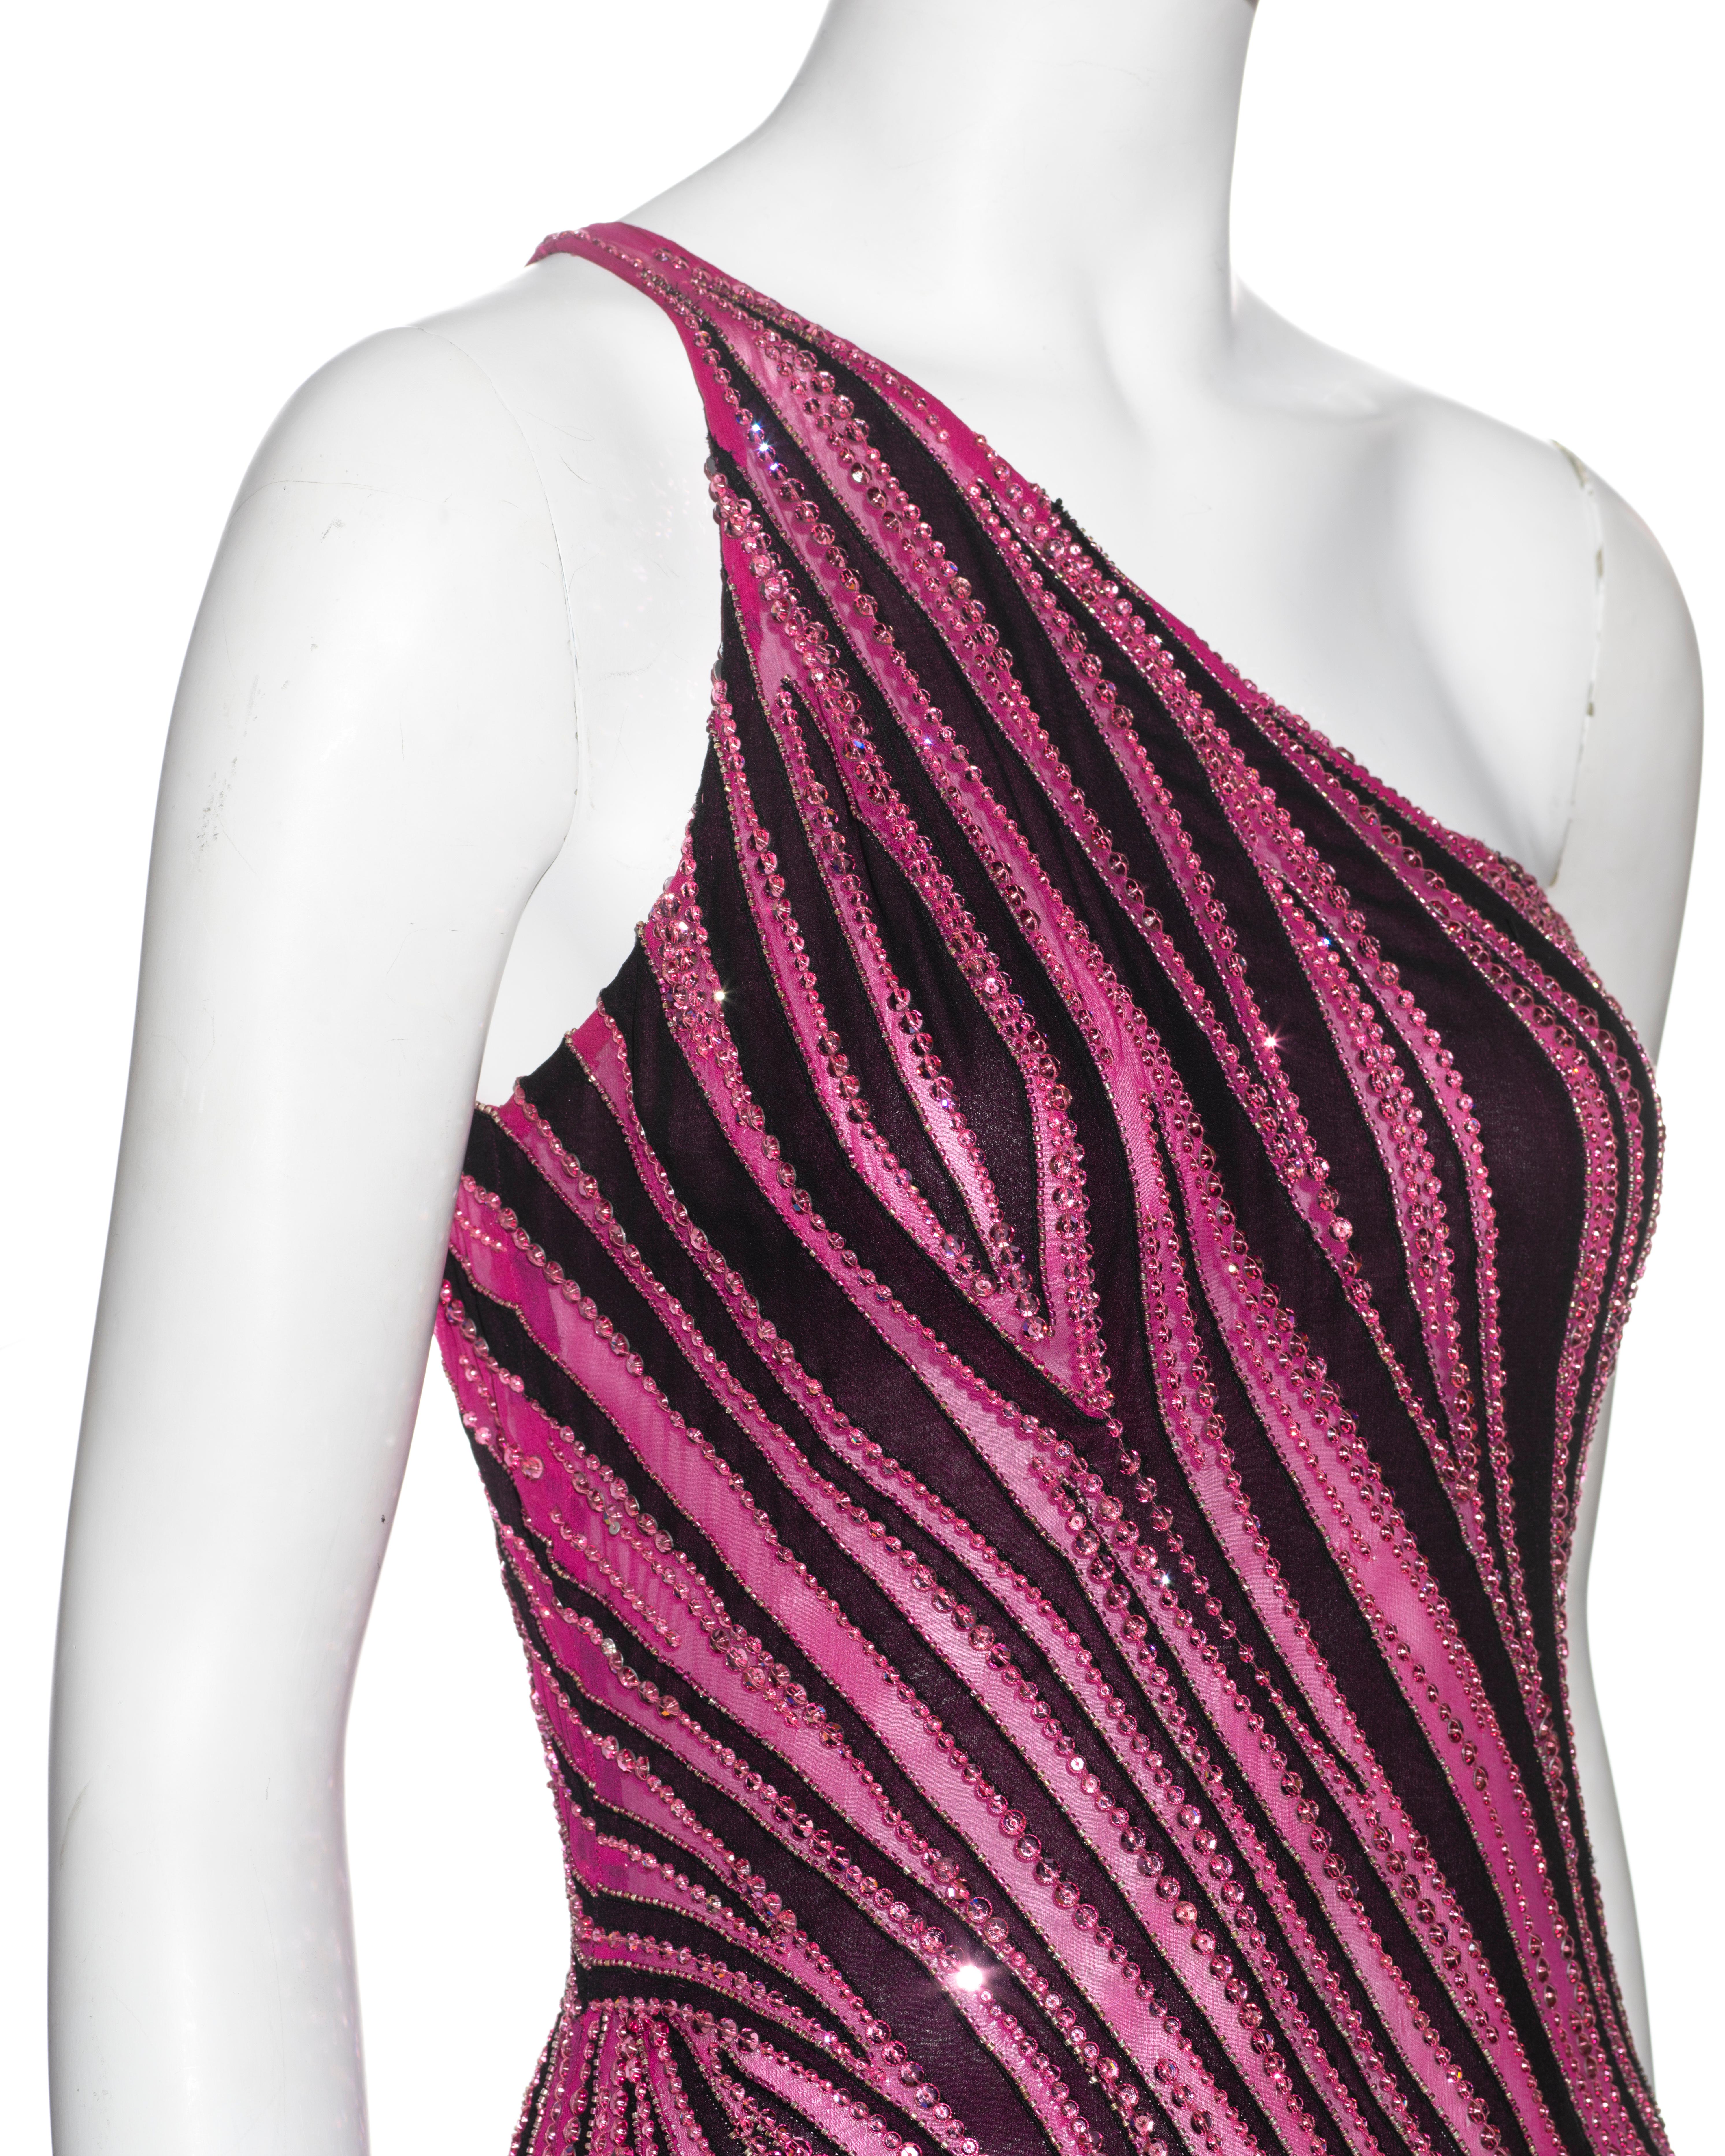 Women's Atelier Versace Couture pink and black embellished evening dress, ss 2001 For Sale